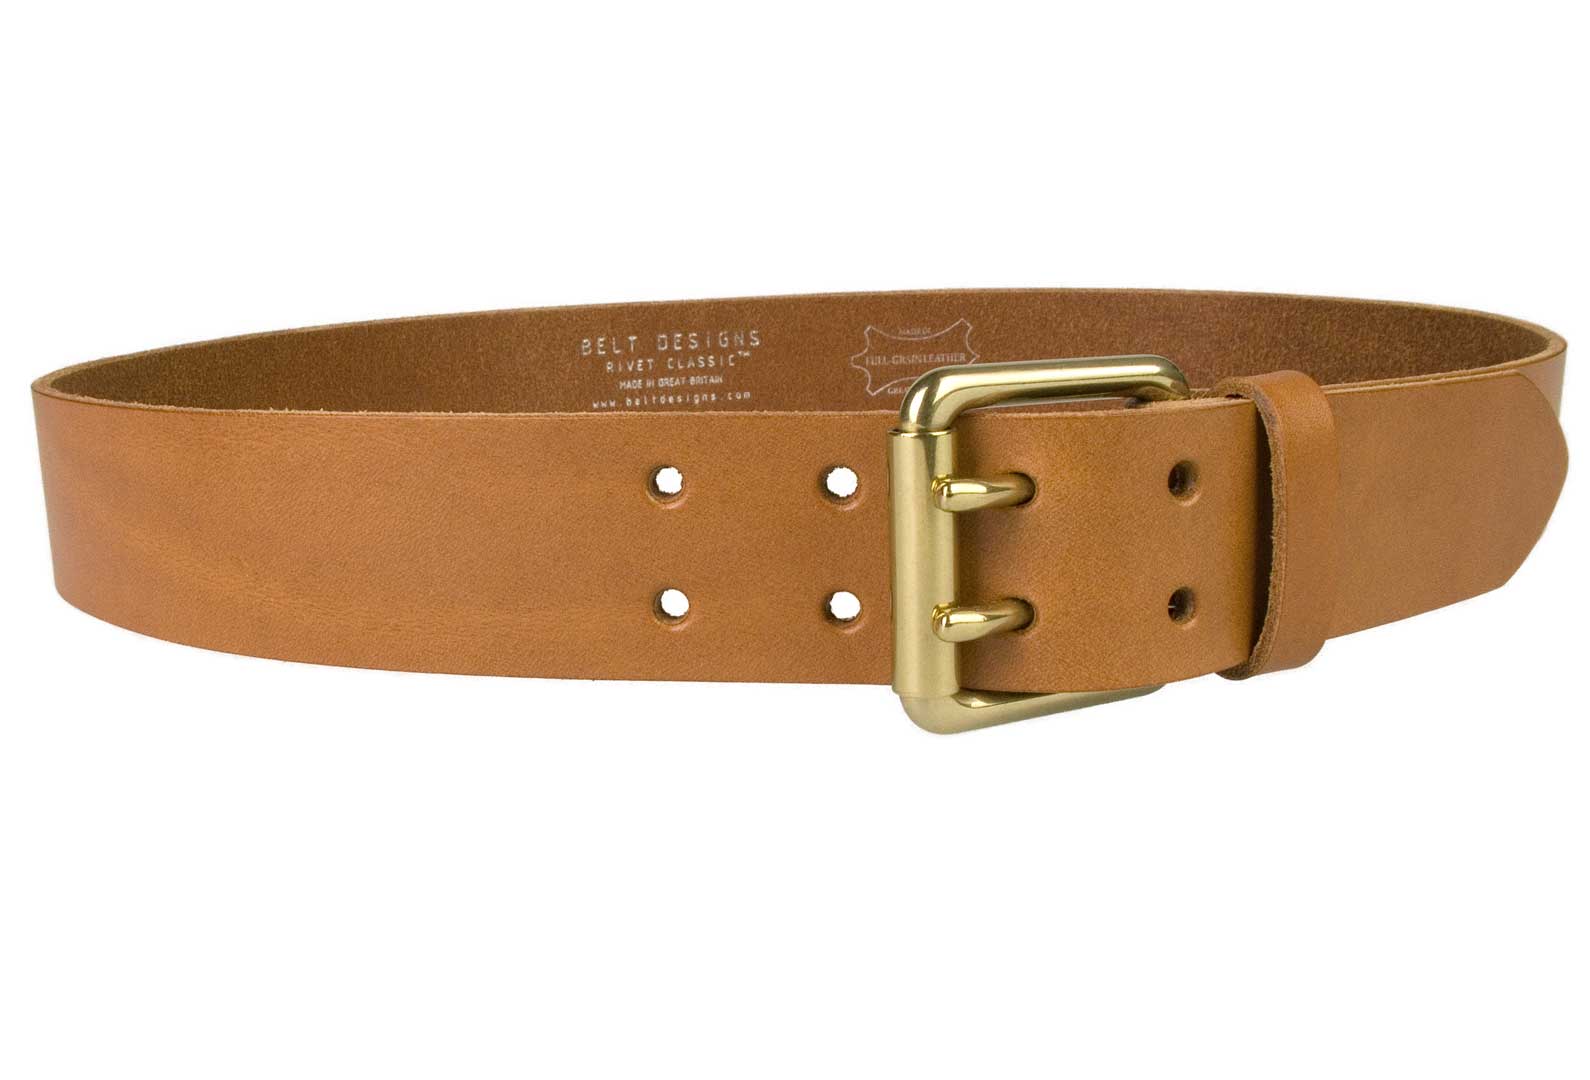 Light Tan Leather Jeans Belt With Solid Brass Buckle - Belt Designs